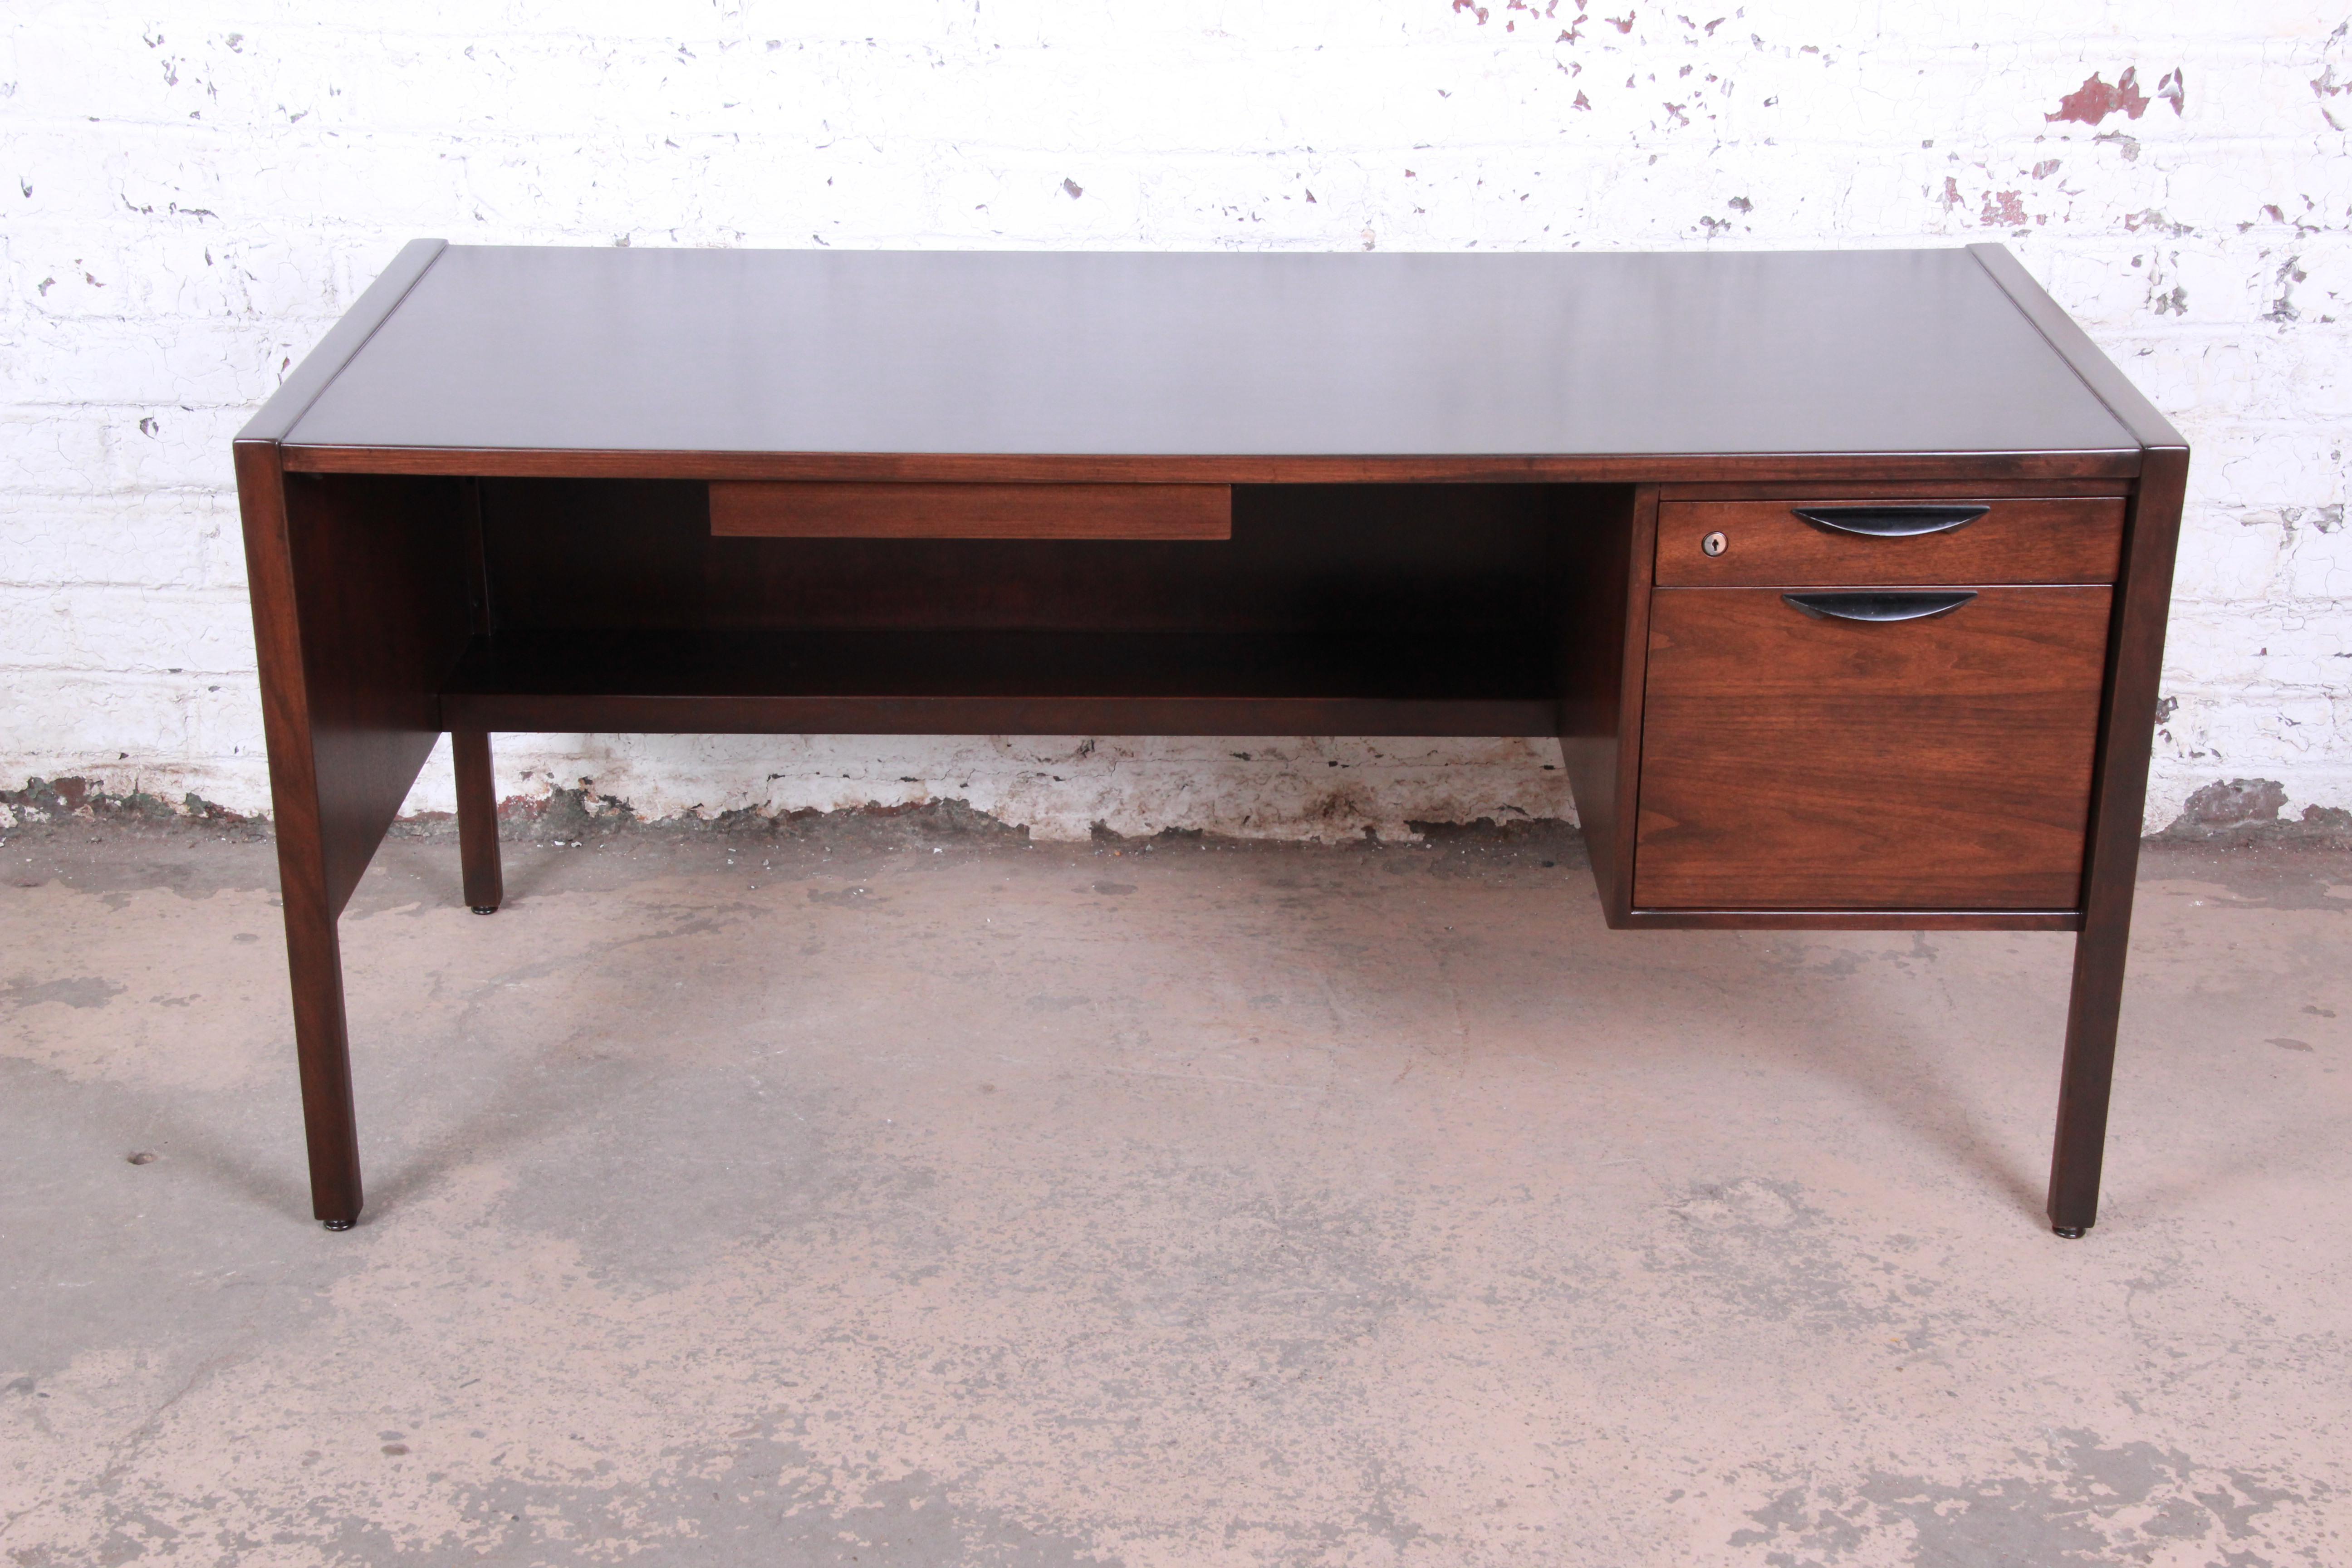 An exceptional Mid-Century Modern walnut executive desk designed by Jens Risom. The desk features gorgeous walnut wood grain and sleek Minimalist design. It offers good storage with three drawers. The desk is finished on all sides and could be used